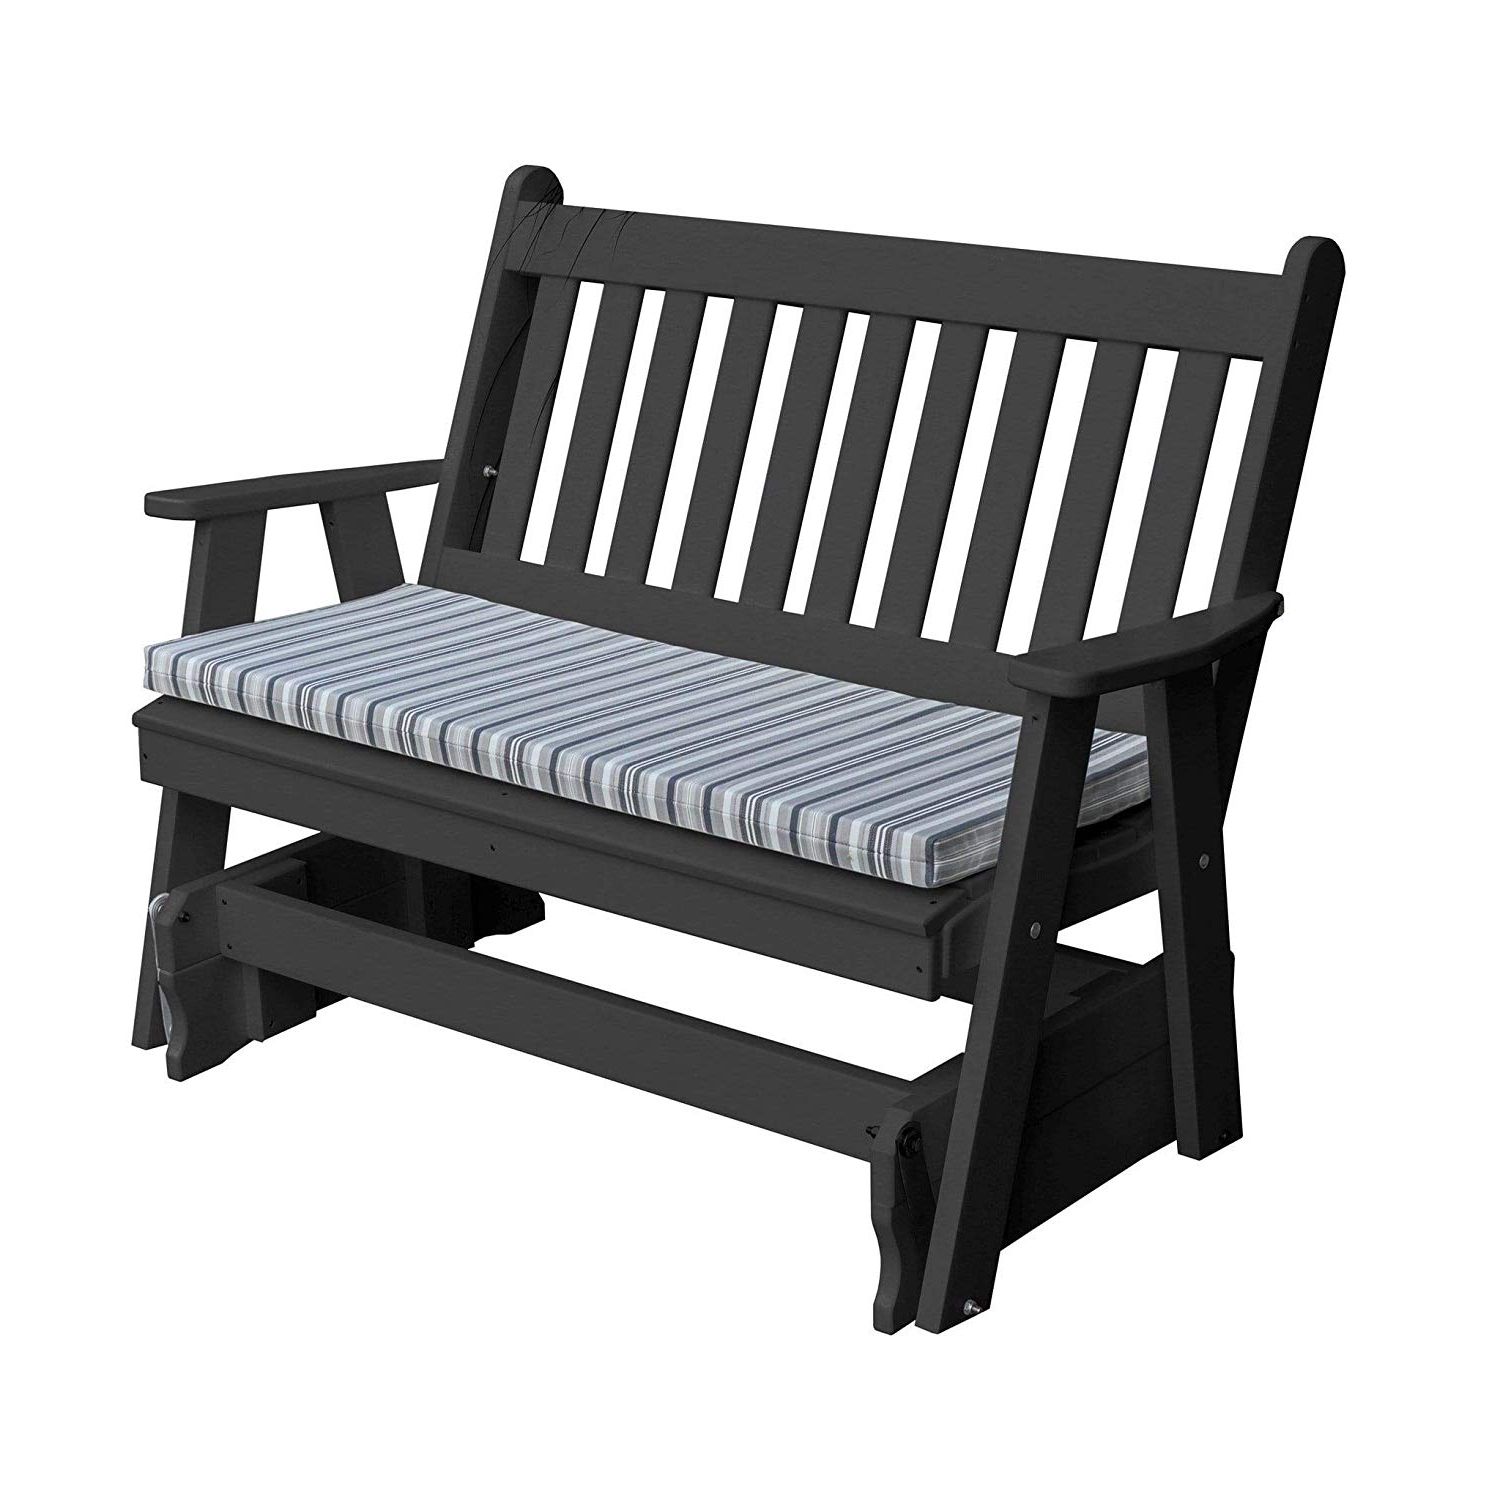 Preferred Traditional English Glider Benches In Amazon : Kunkle Holdings, Llc Outdoor 5 Foot Glider In (View 4 of 34)